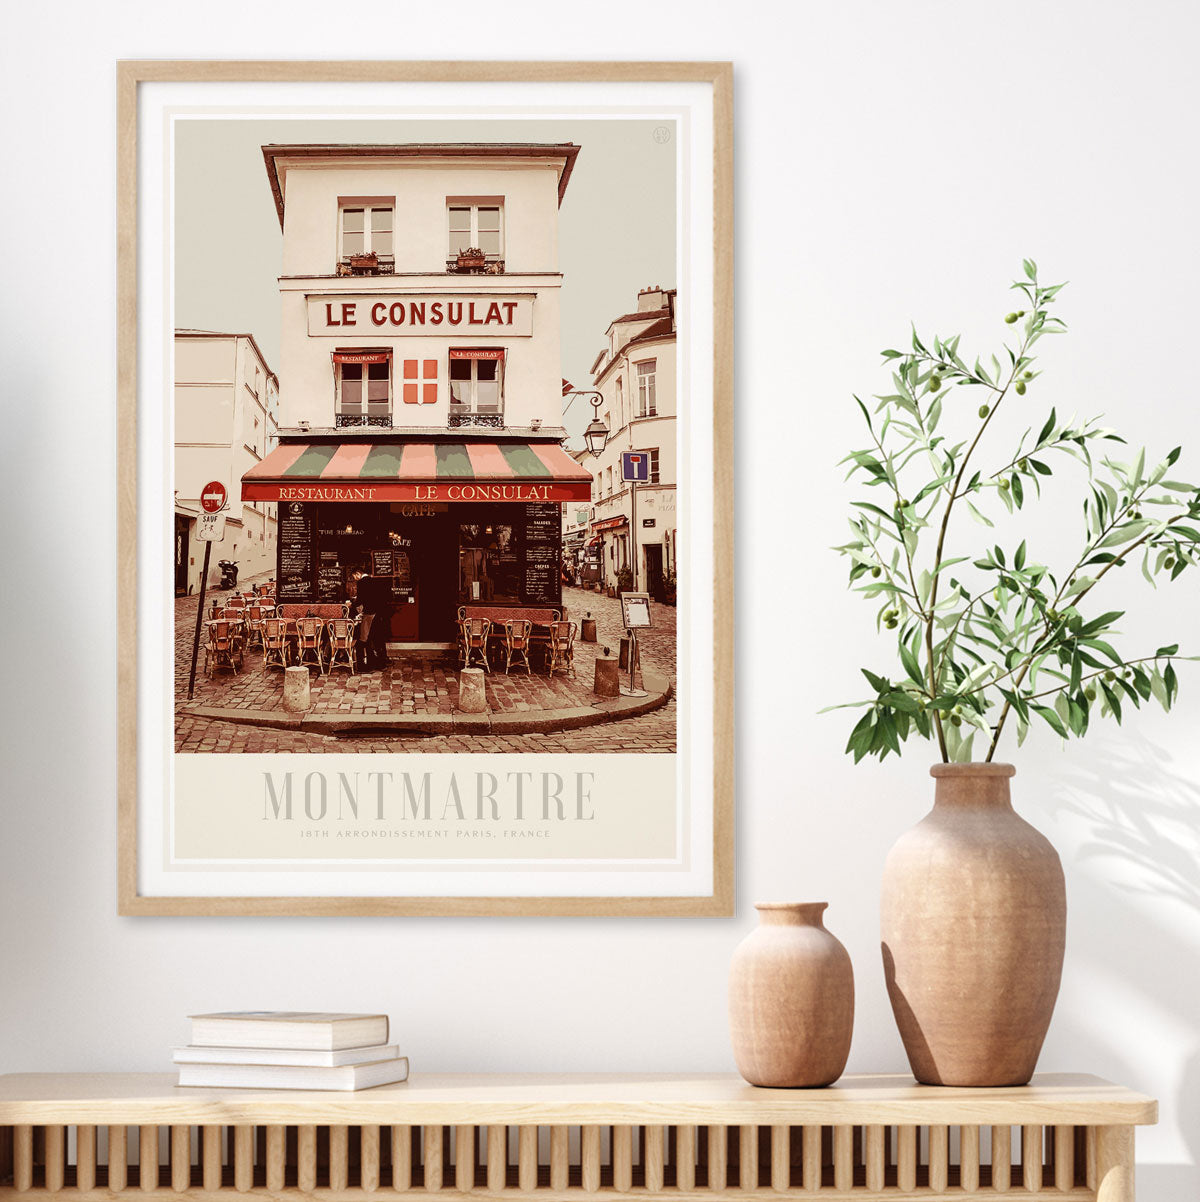 Le Consulat Cafe Paris retro vintage poster from Places We Luv